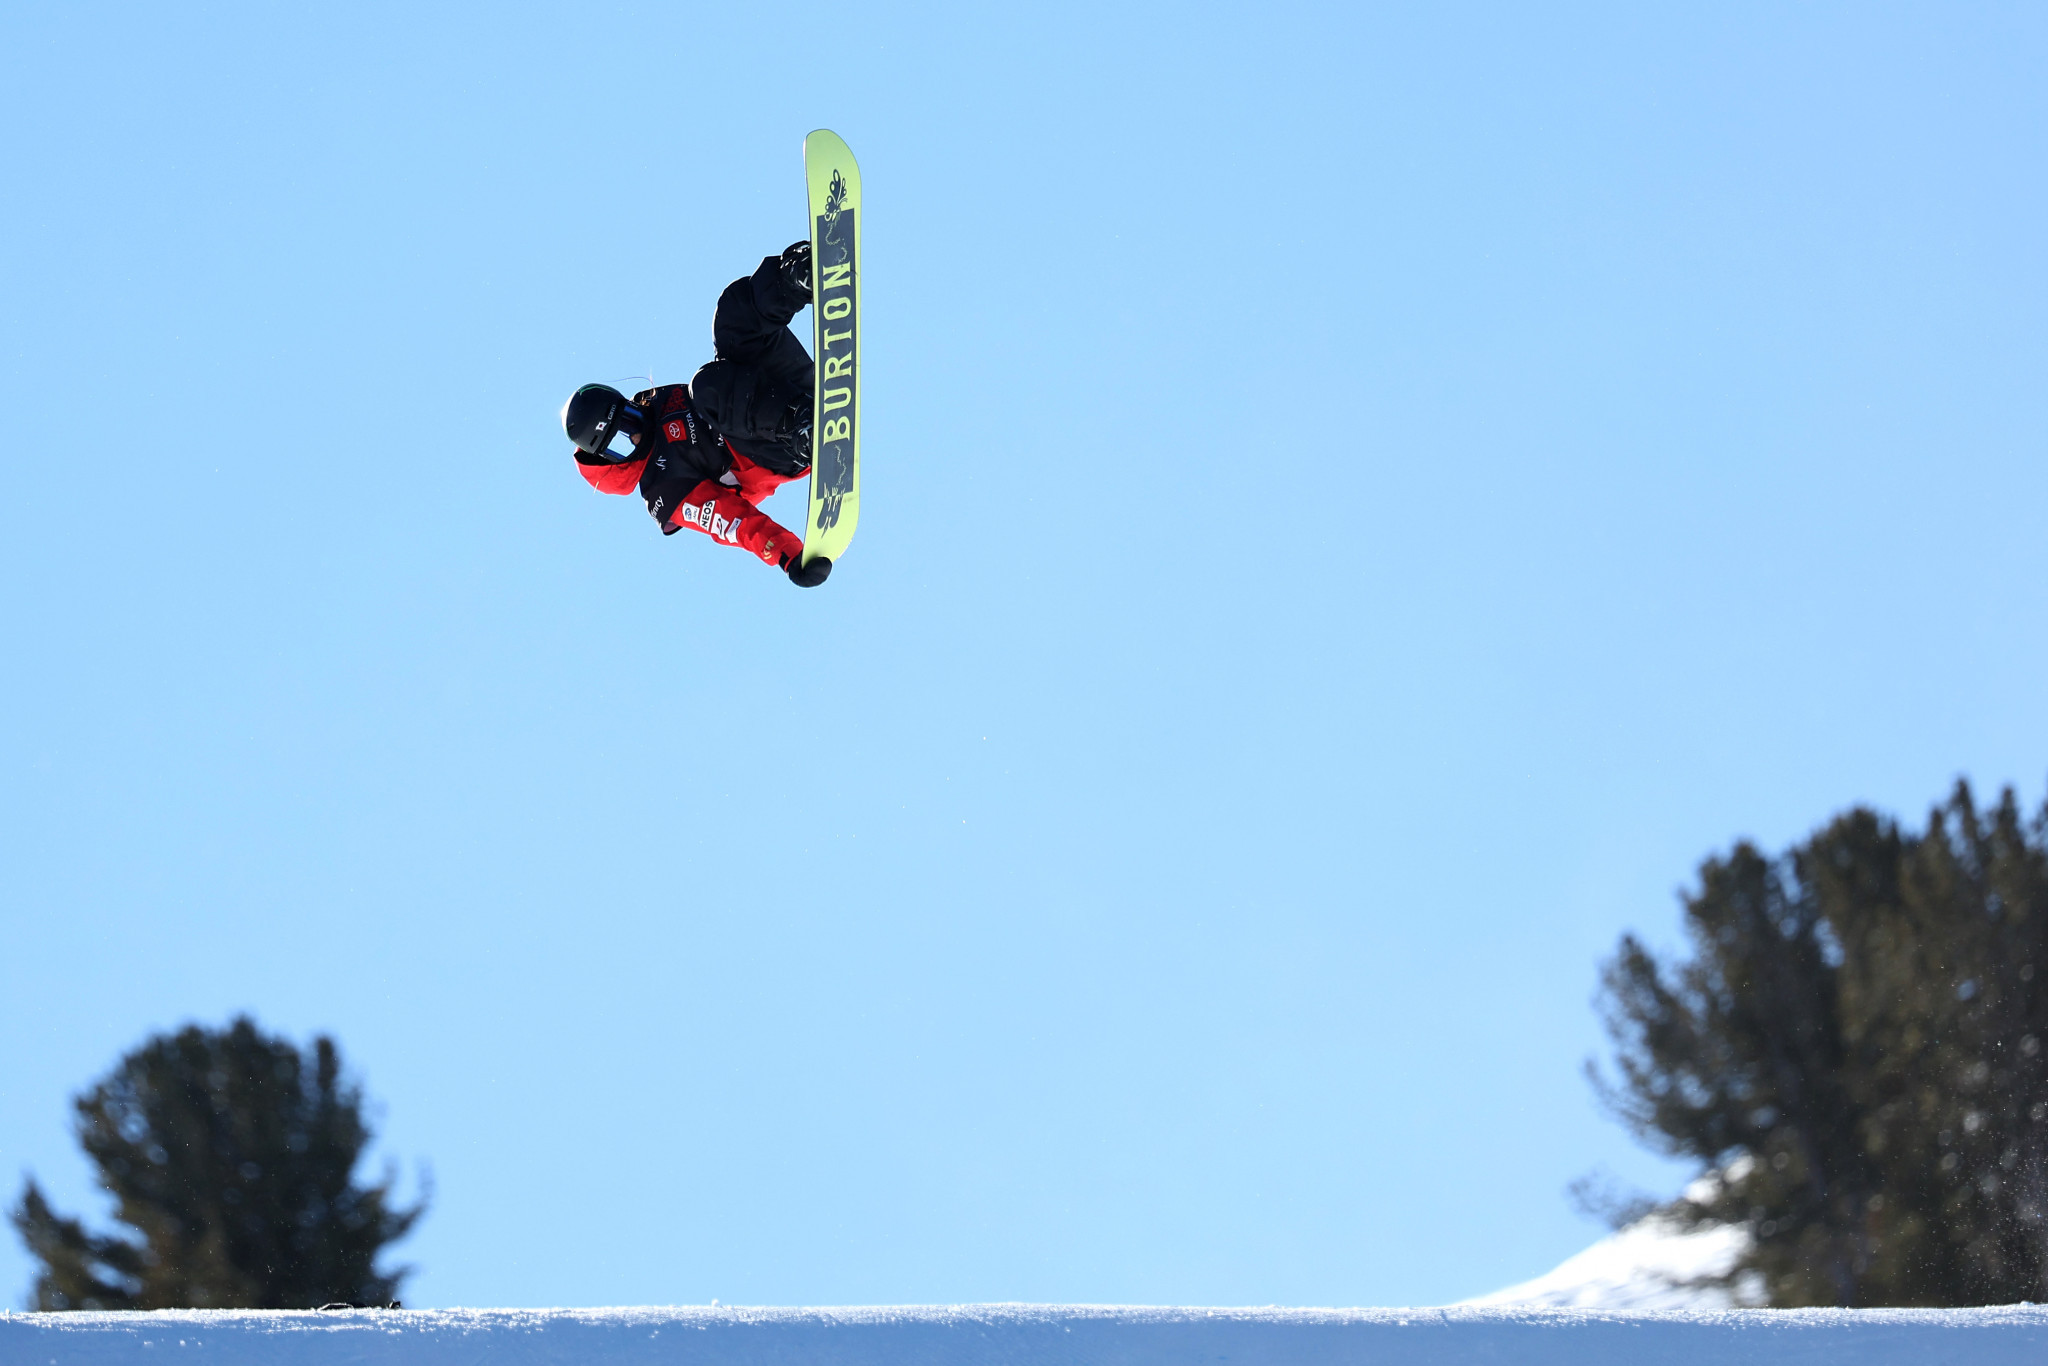 Murase tops Snowboard World Cup qualification in slopestyle